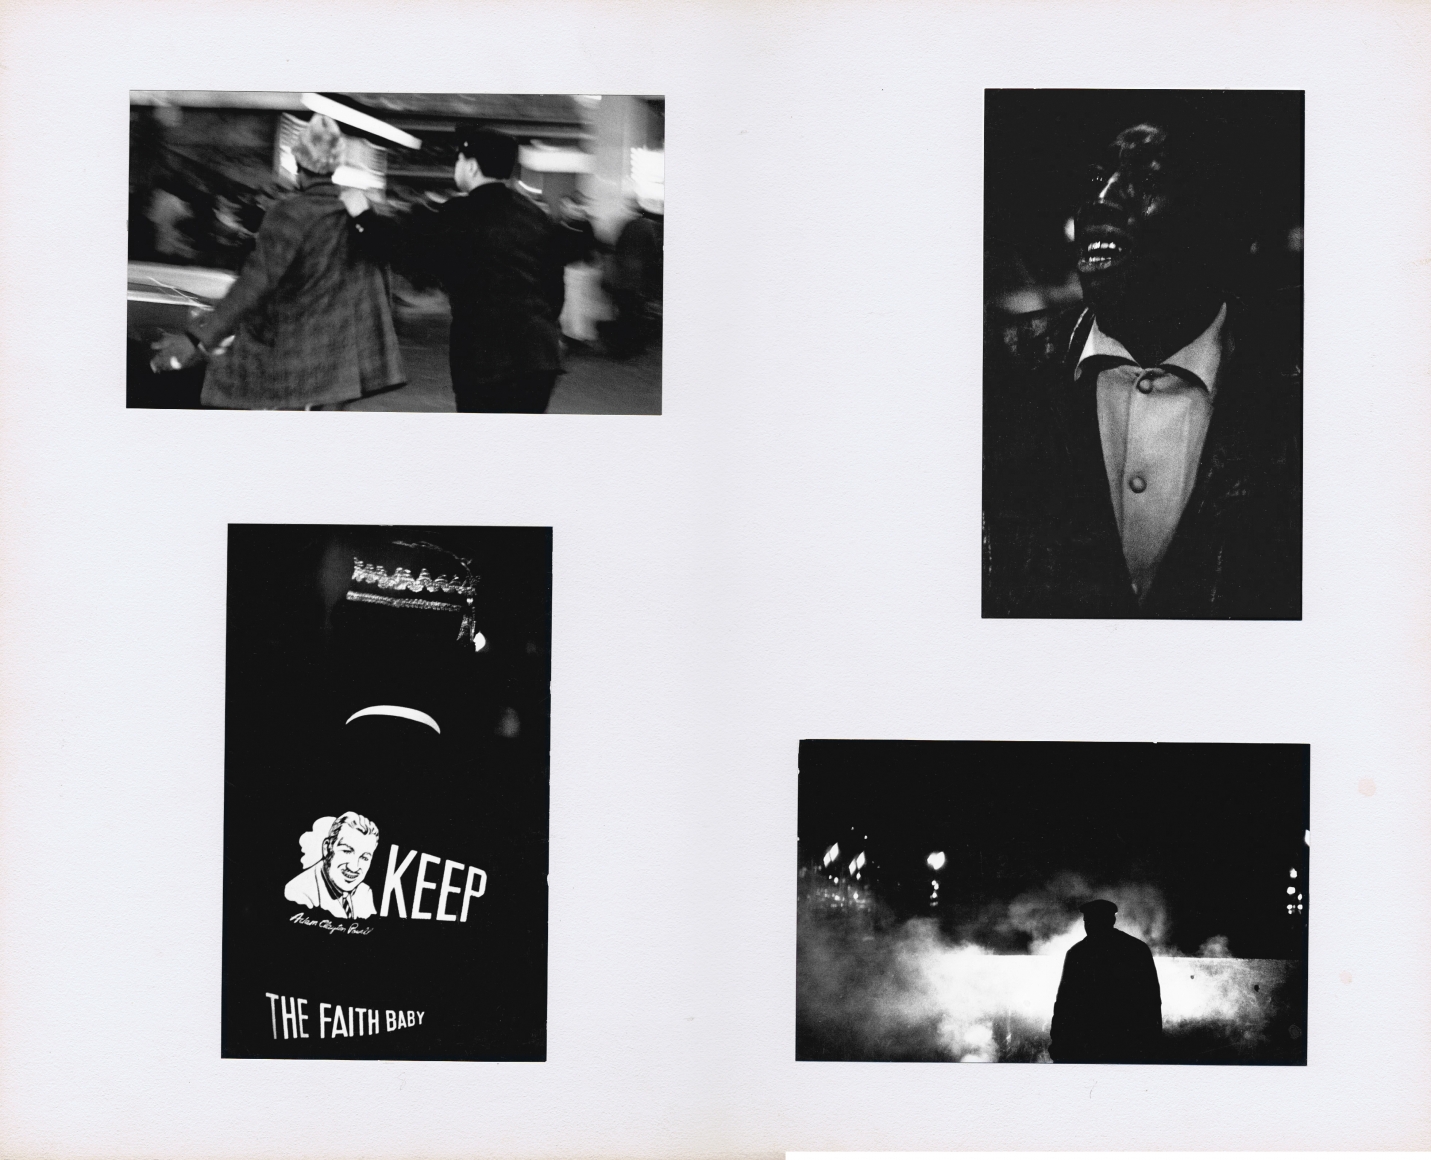 33. Beuford Smith, I Have a Dream: The Assassination of Martin Luther King, Jr., April 5, 1968. Four photographs mounted on white board. Features a man being arrested, a young man crying, a man wearing a jacket that reads "Keep the faith, baby," and a figure silhouetted against clouds of smoke.